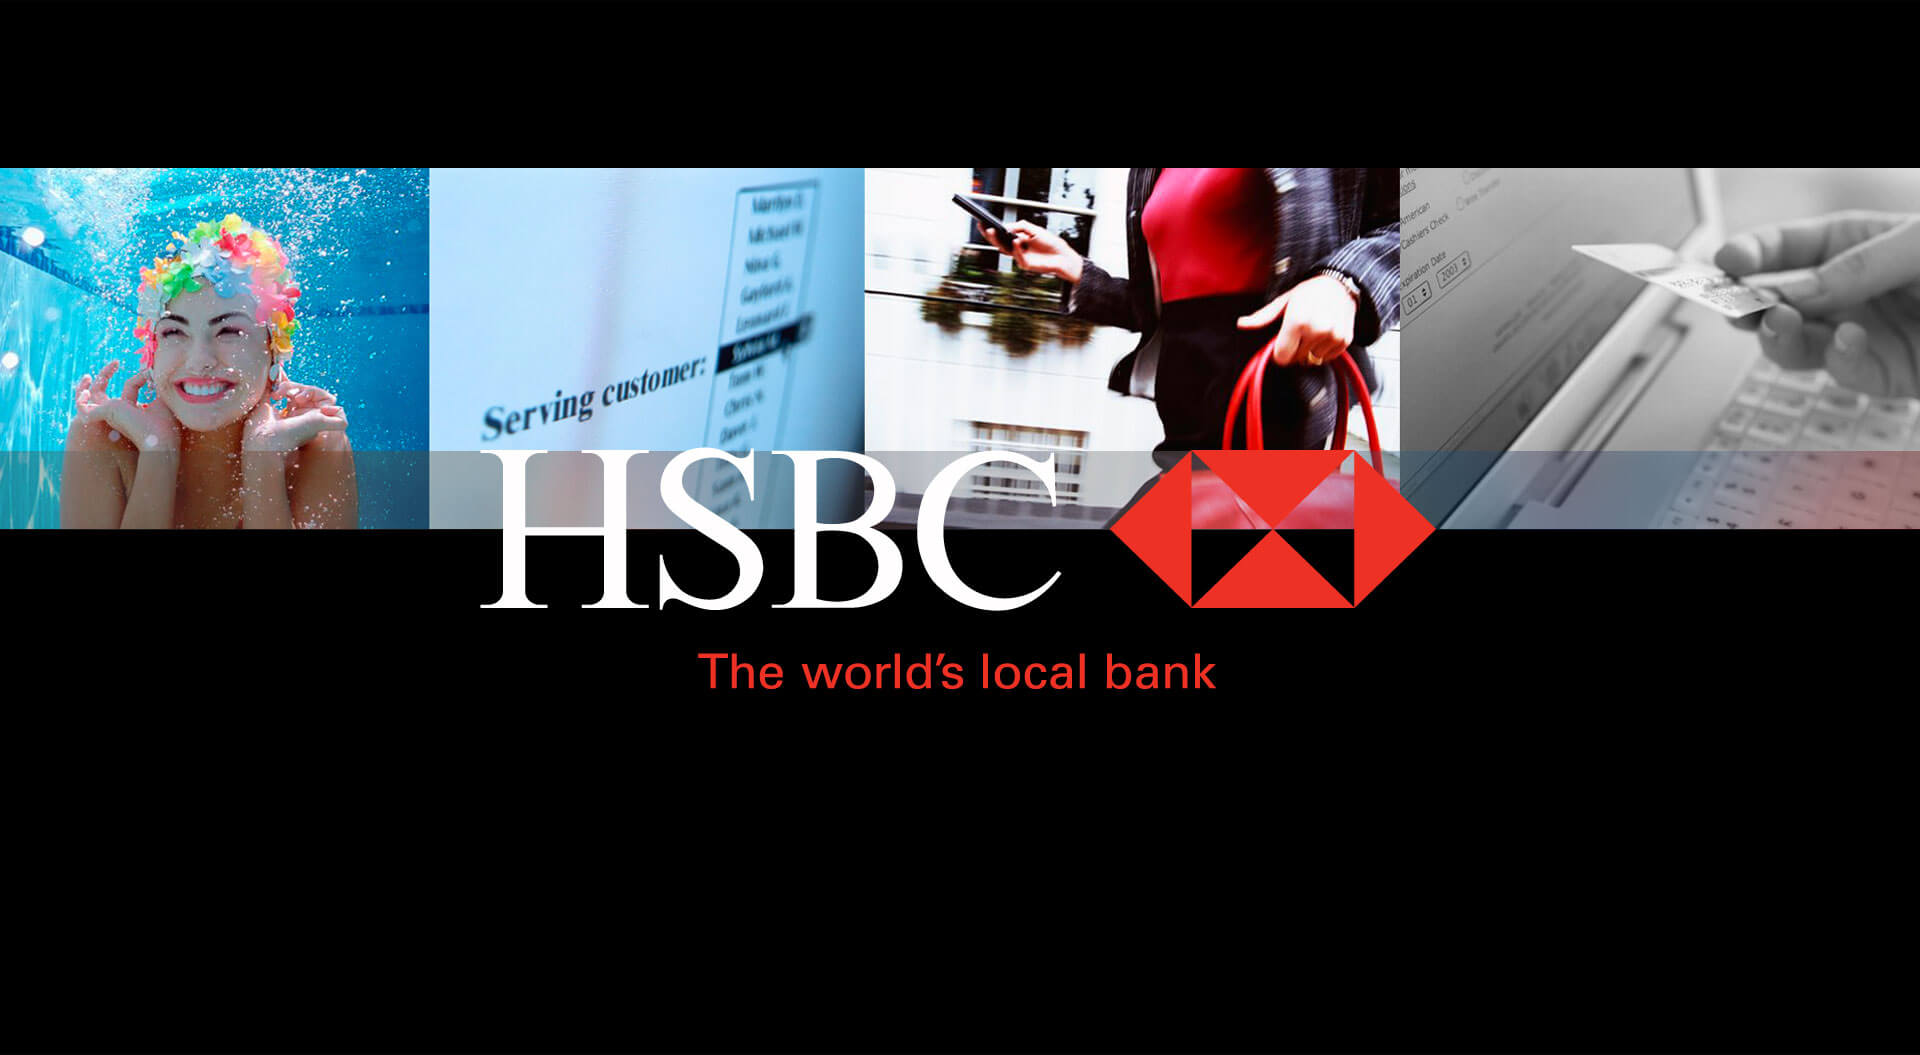 Branch audit, design and communications, HSBC the world's local bank